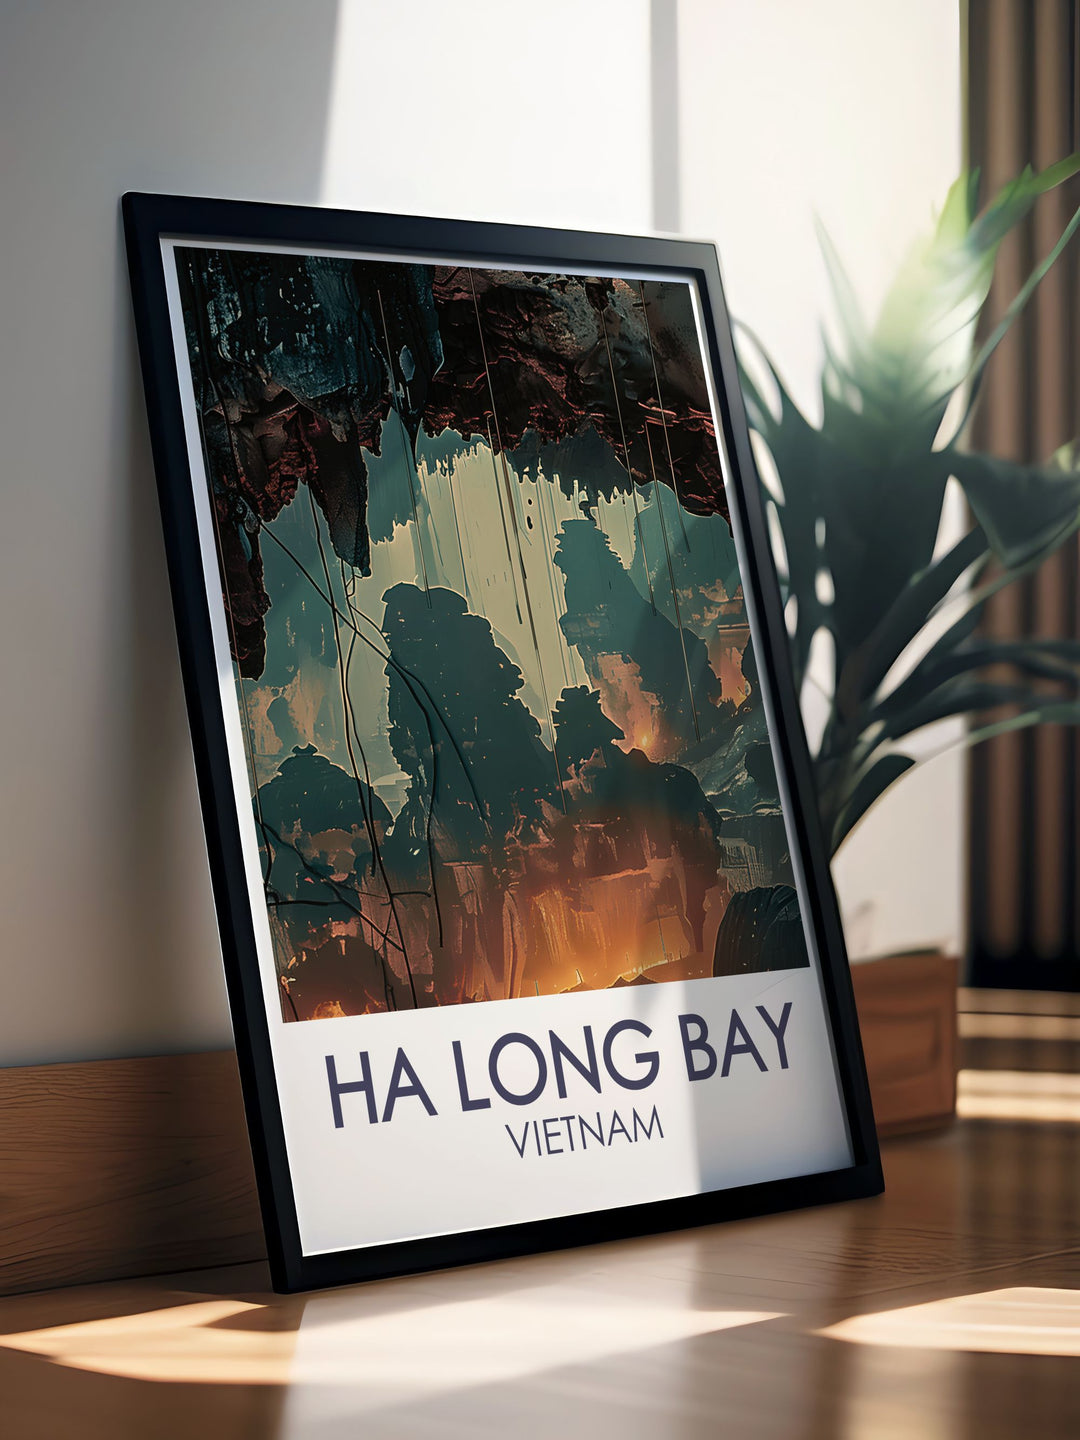 This detailed illustration of Ha Long Bay features the breathtaking Surprising Cave and its magical underground formations, offering a captivating view of one of Asias most beautiful destinations.